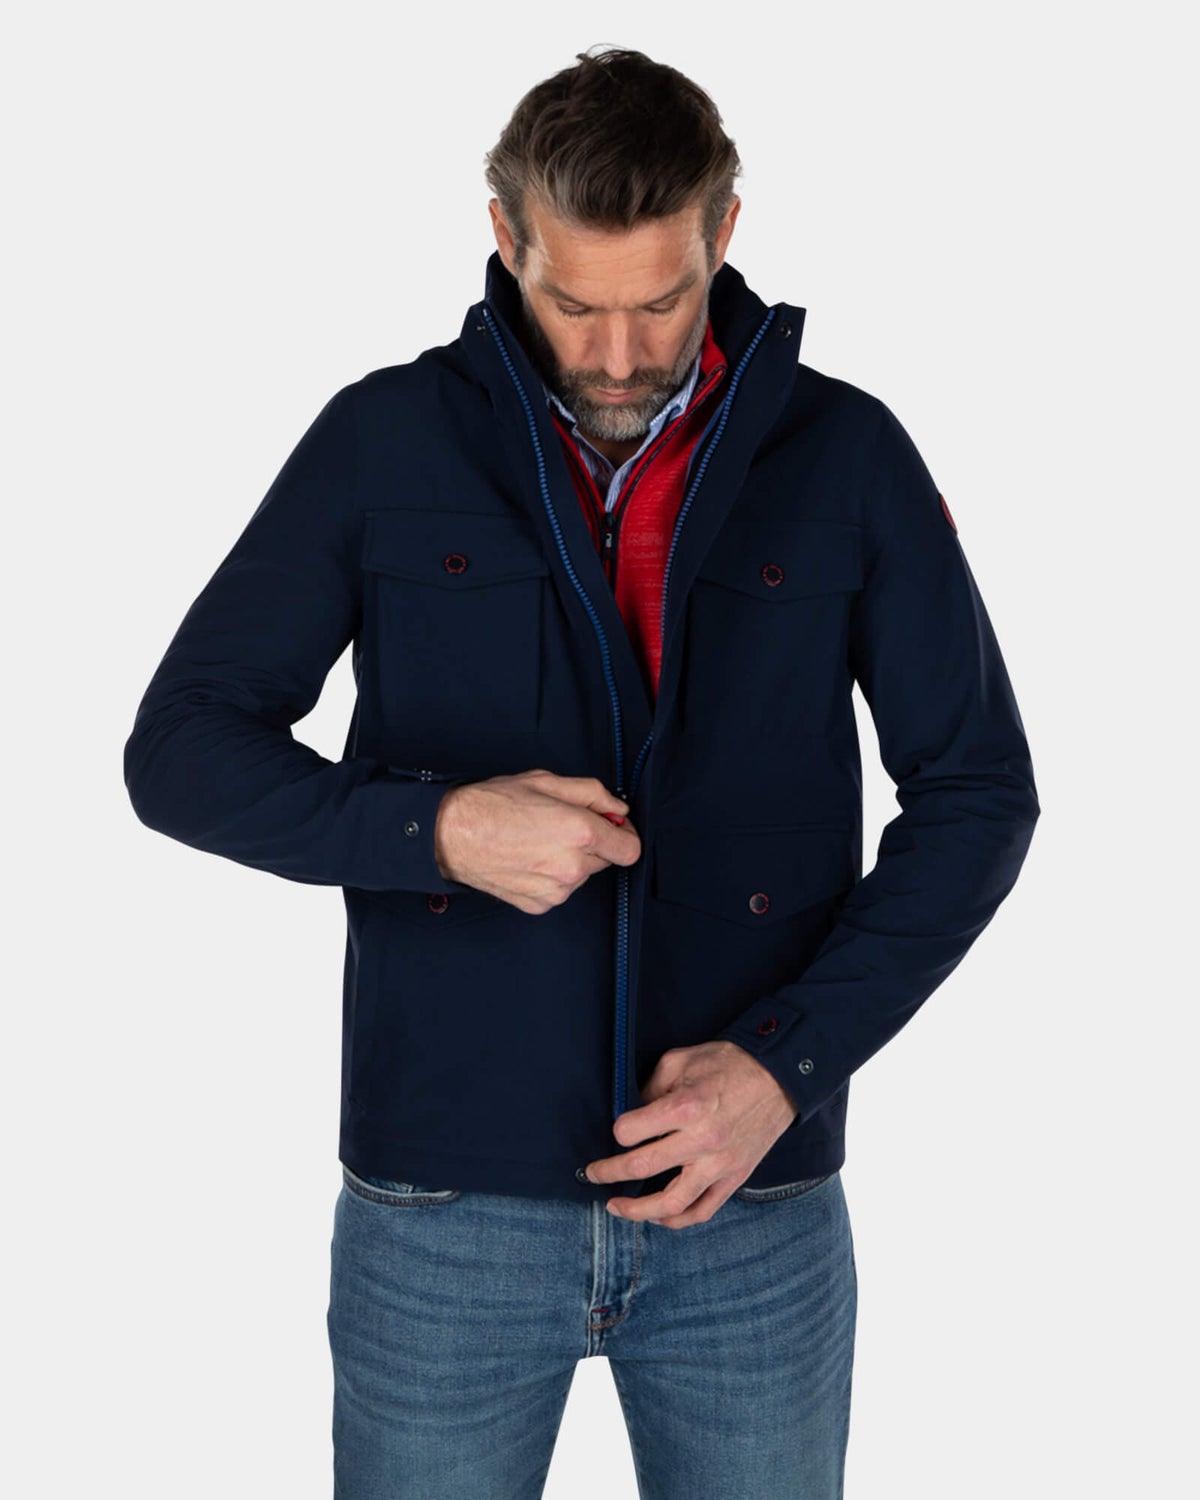 Chaqueta impermeable con capucha - Industrial Navy